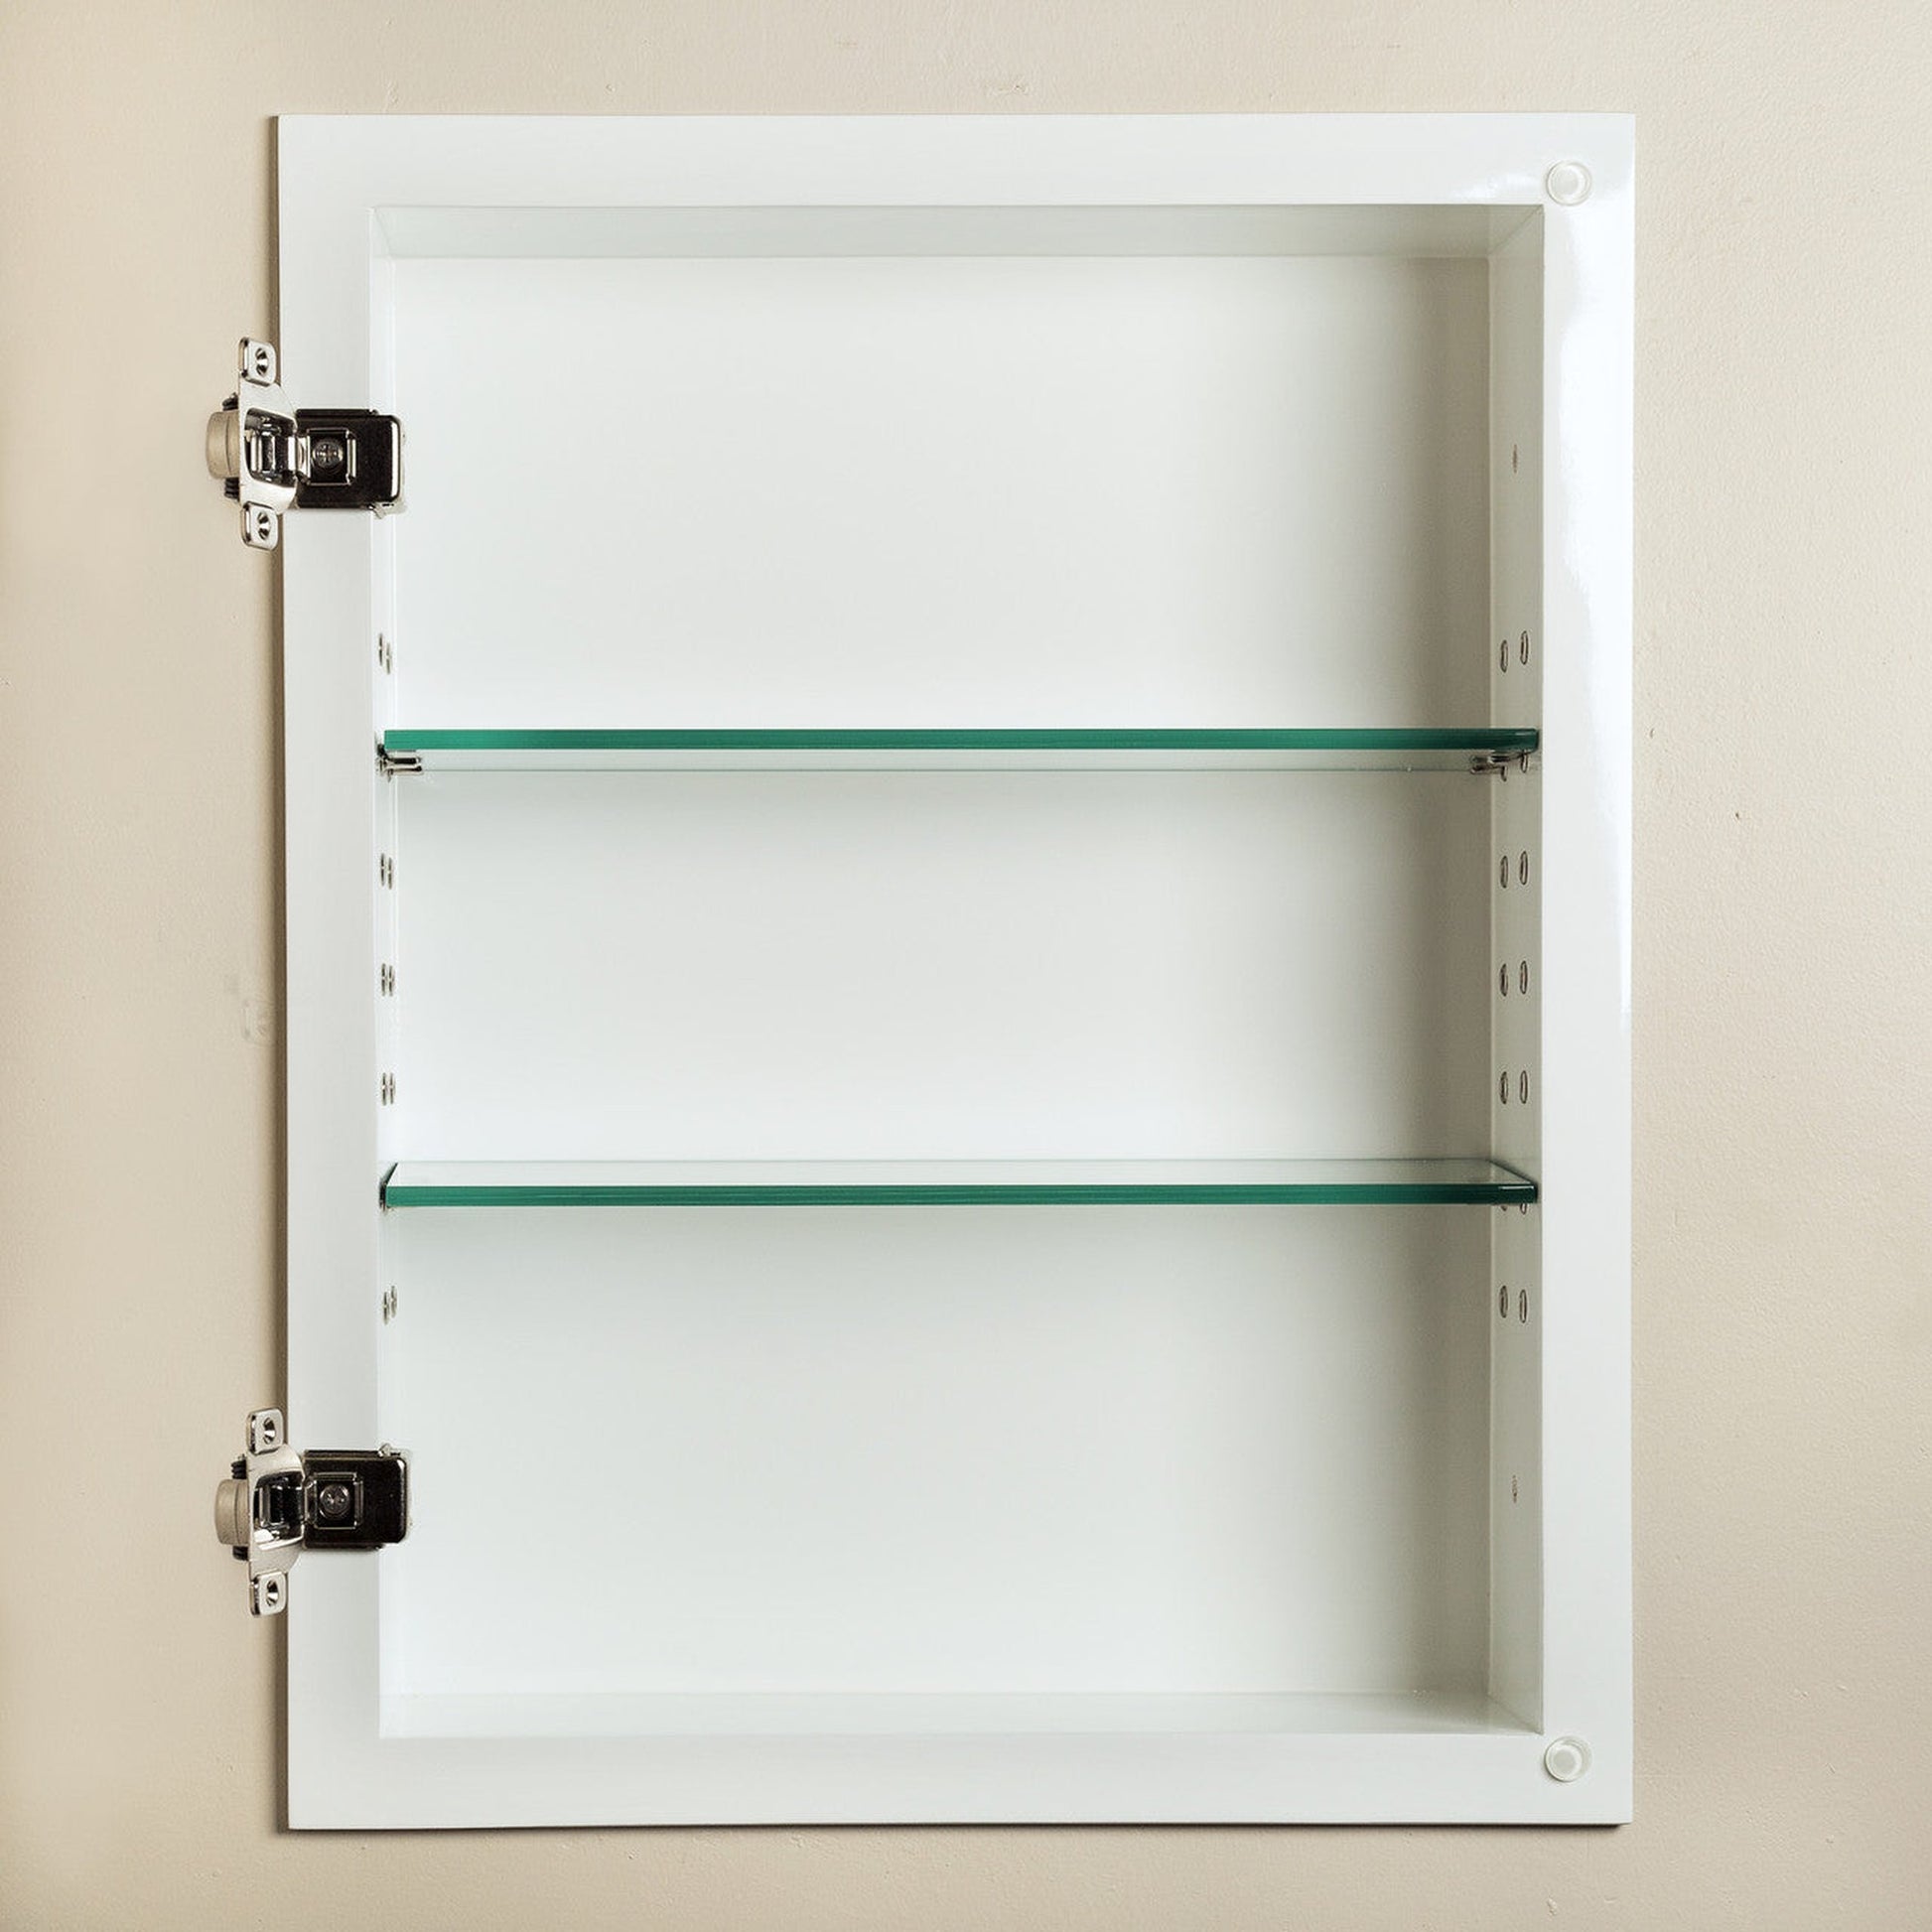 Fox Hollow Furnishings 14" x 18" White Shaker Style White Interior Special 3" Depth Recessed Medicine Cabinet